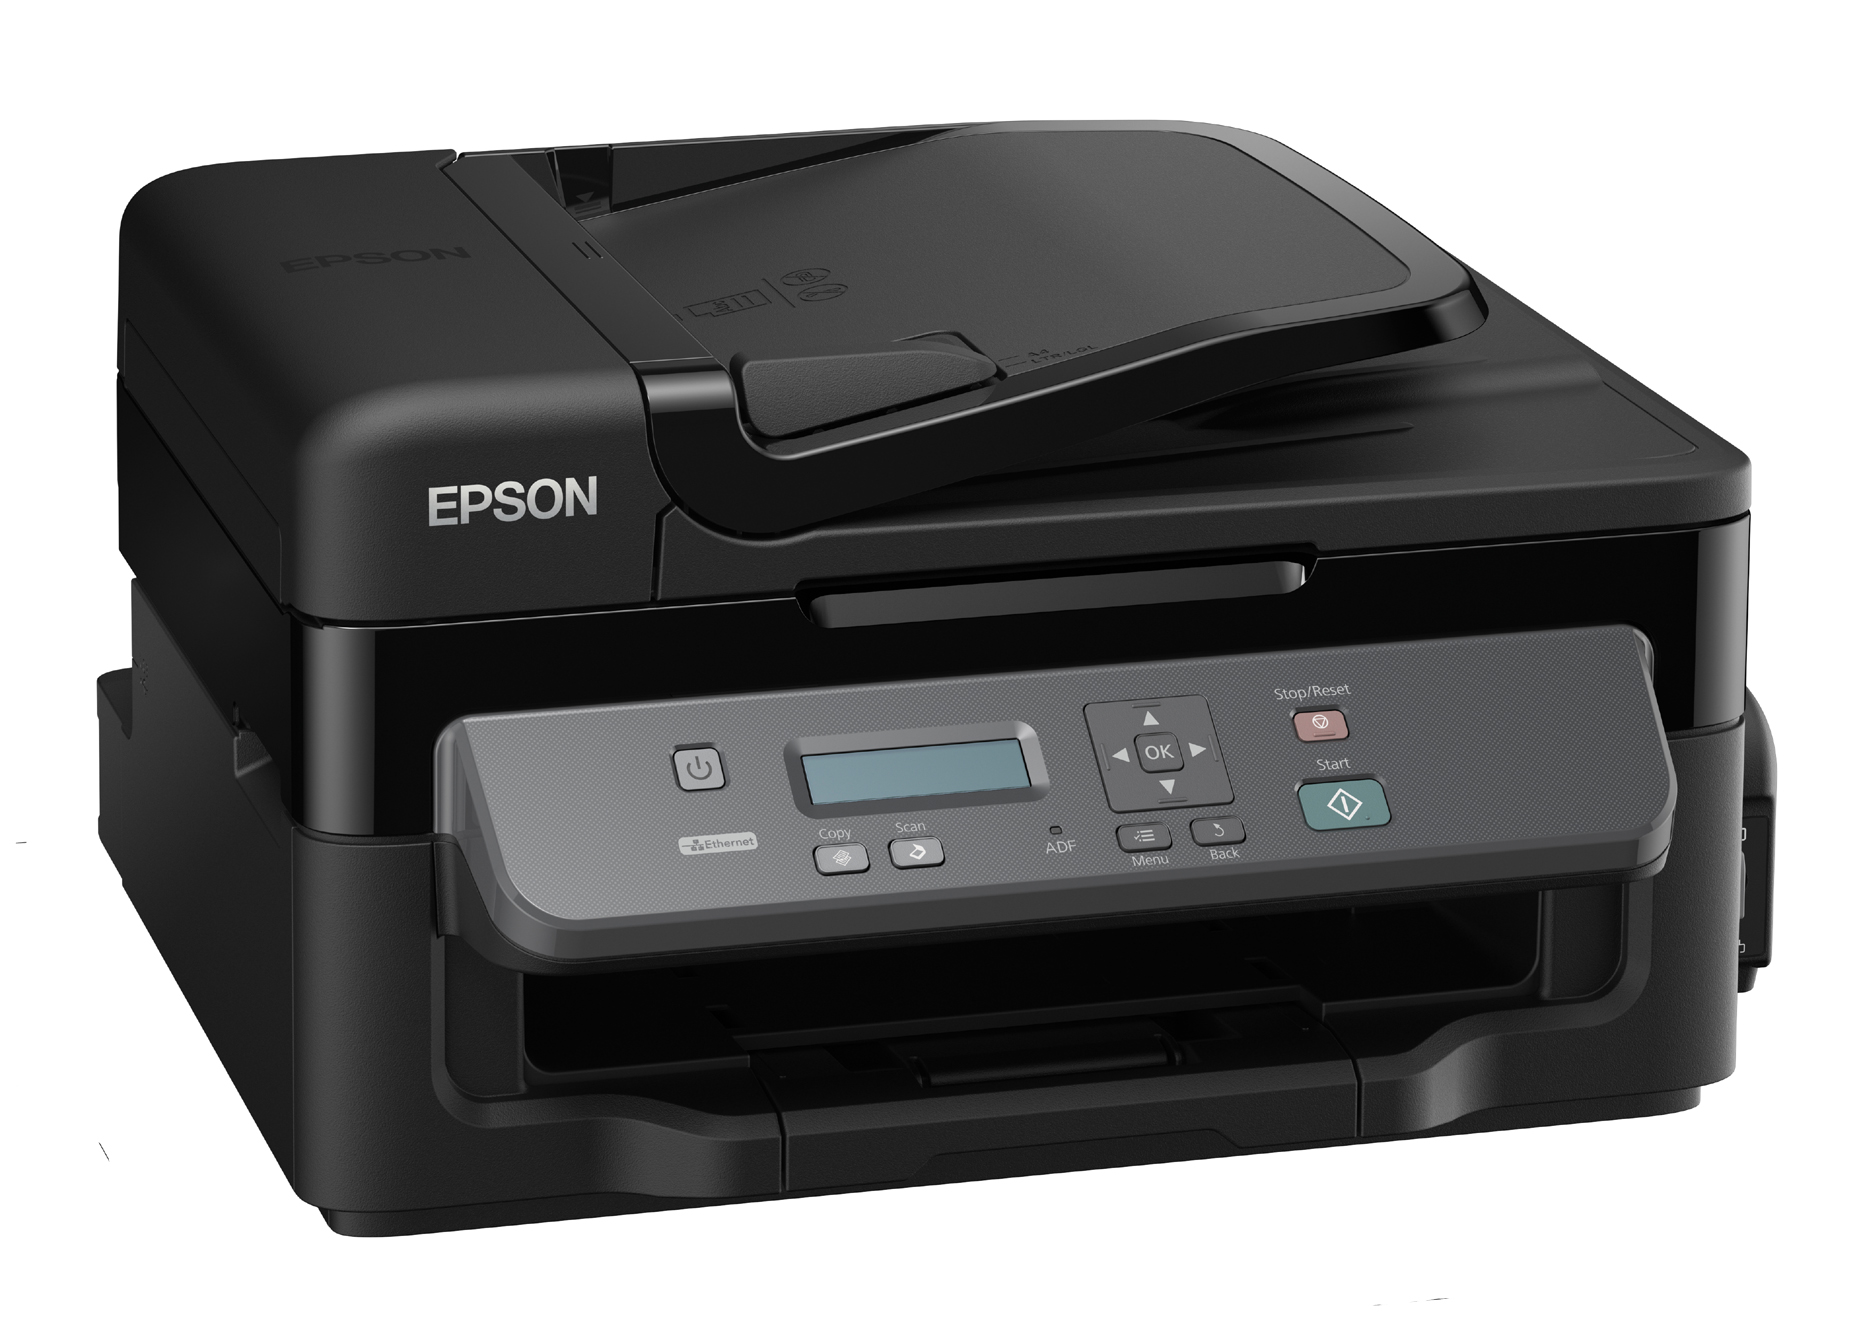 Epson Workforce M200 The Epson Workforce M200 Is An All In One Monochrome Integrated Ink Tank 9435